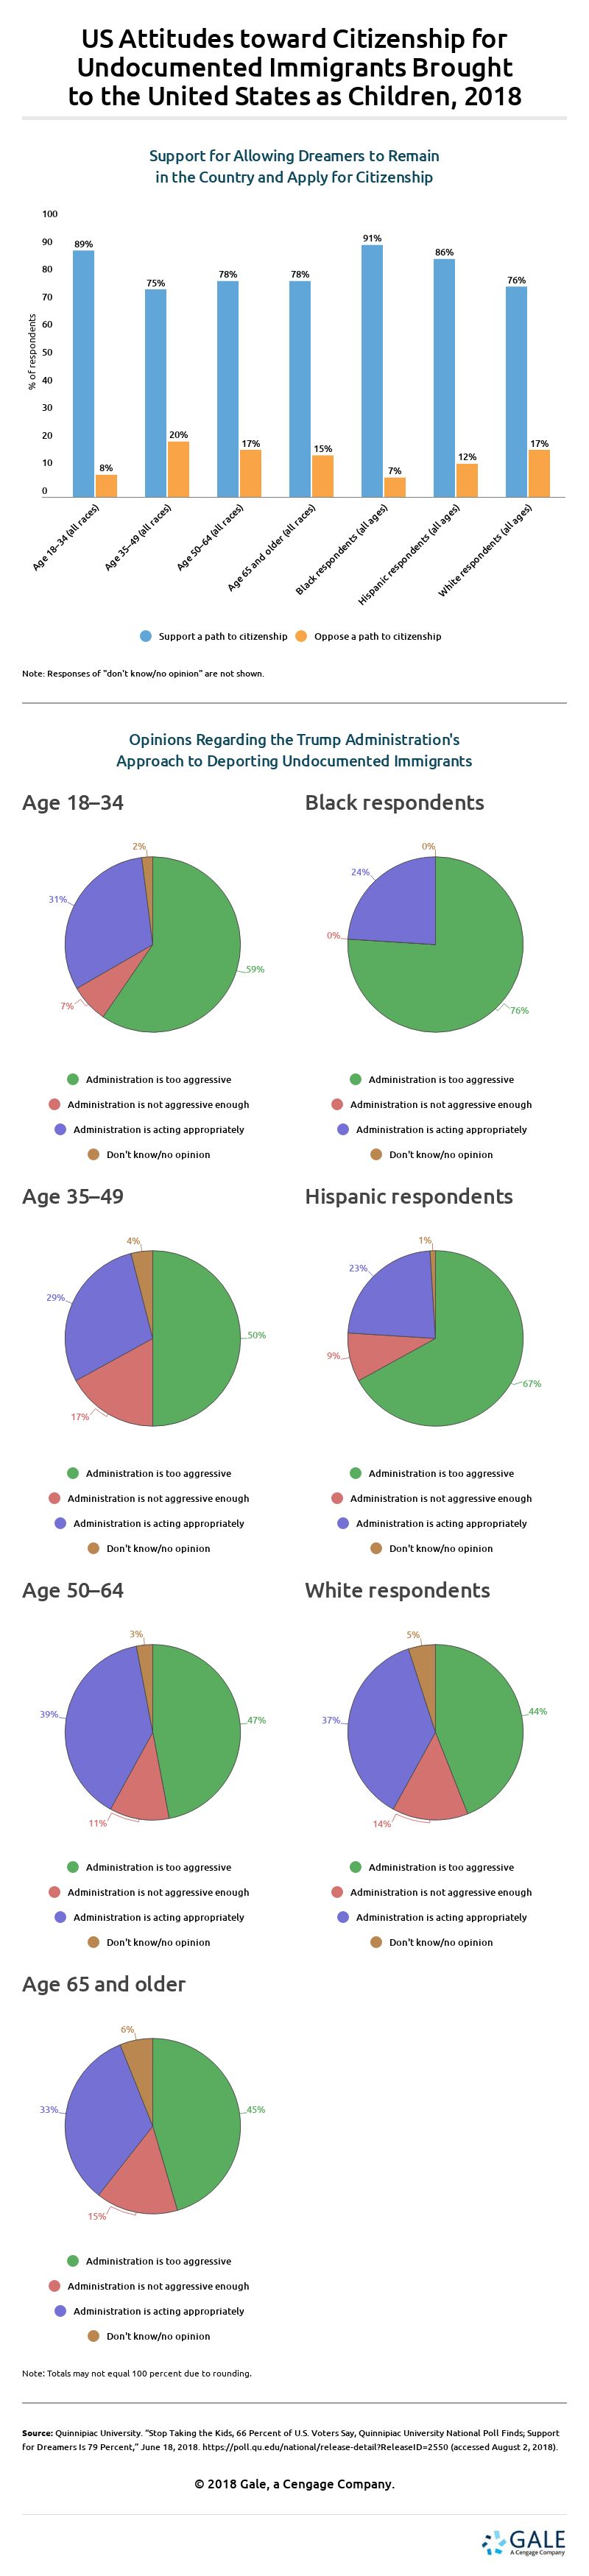 This graphic shows US attitudes in 2018 toward citizenship for undocumented immigrants brought to the United States as children.